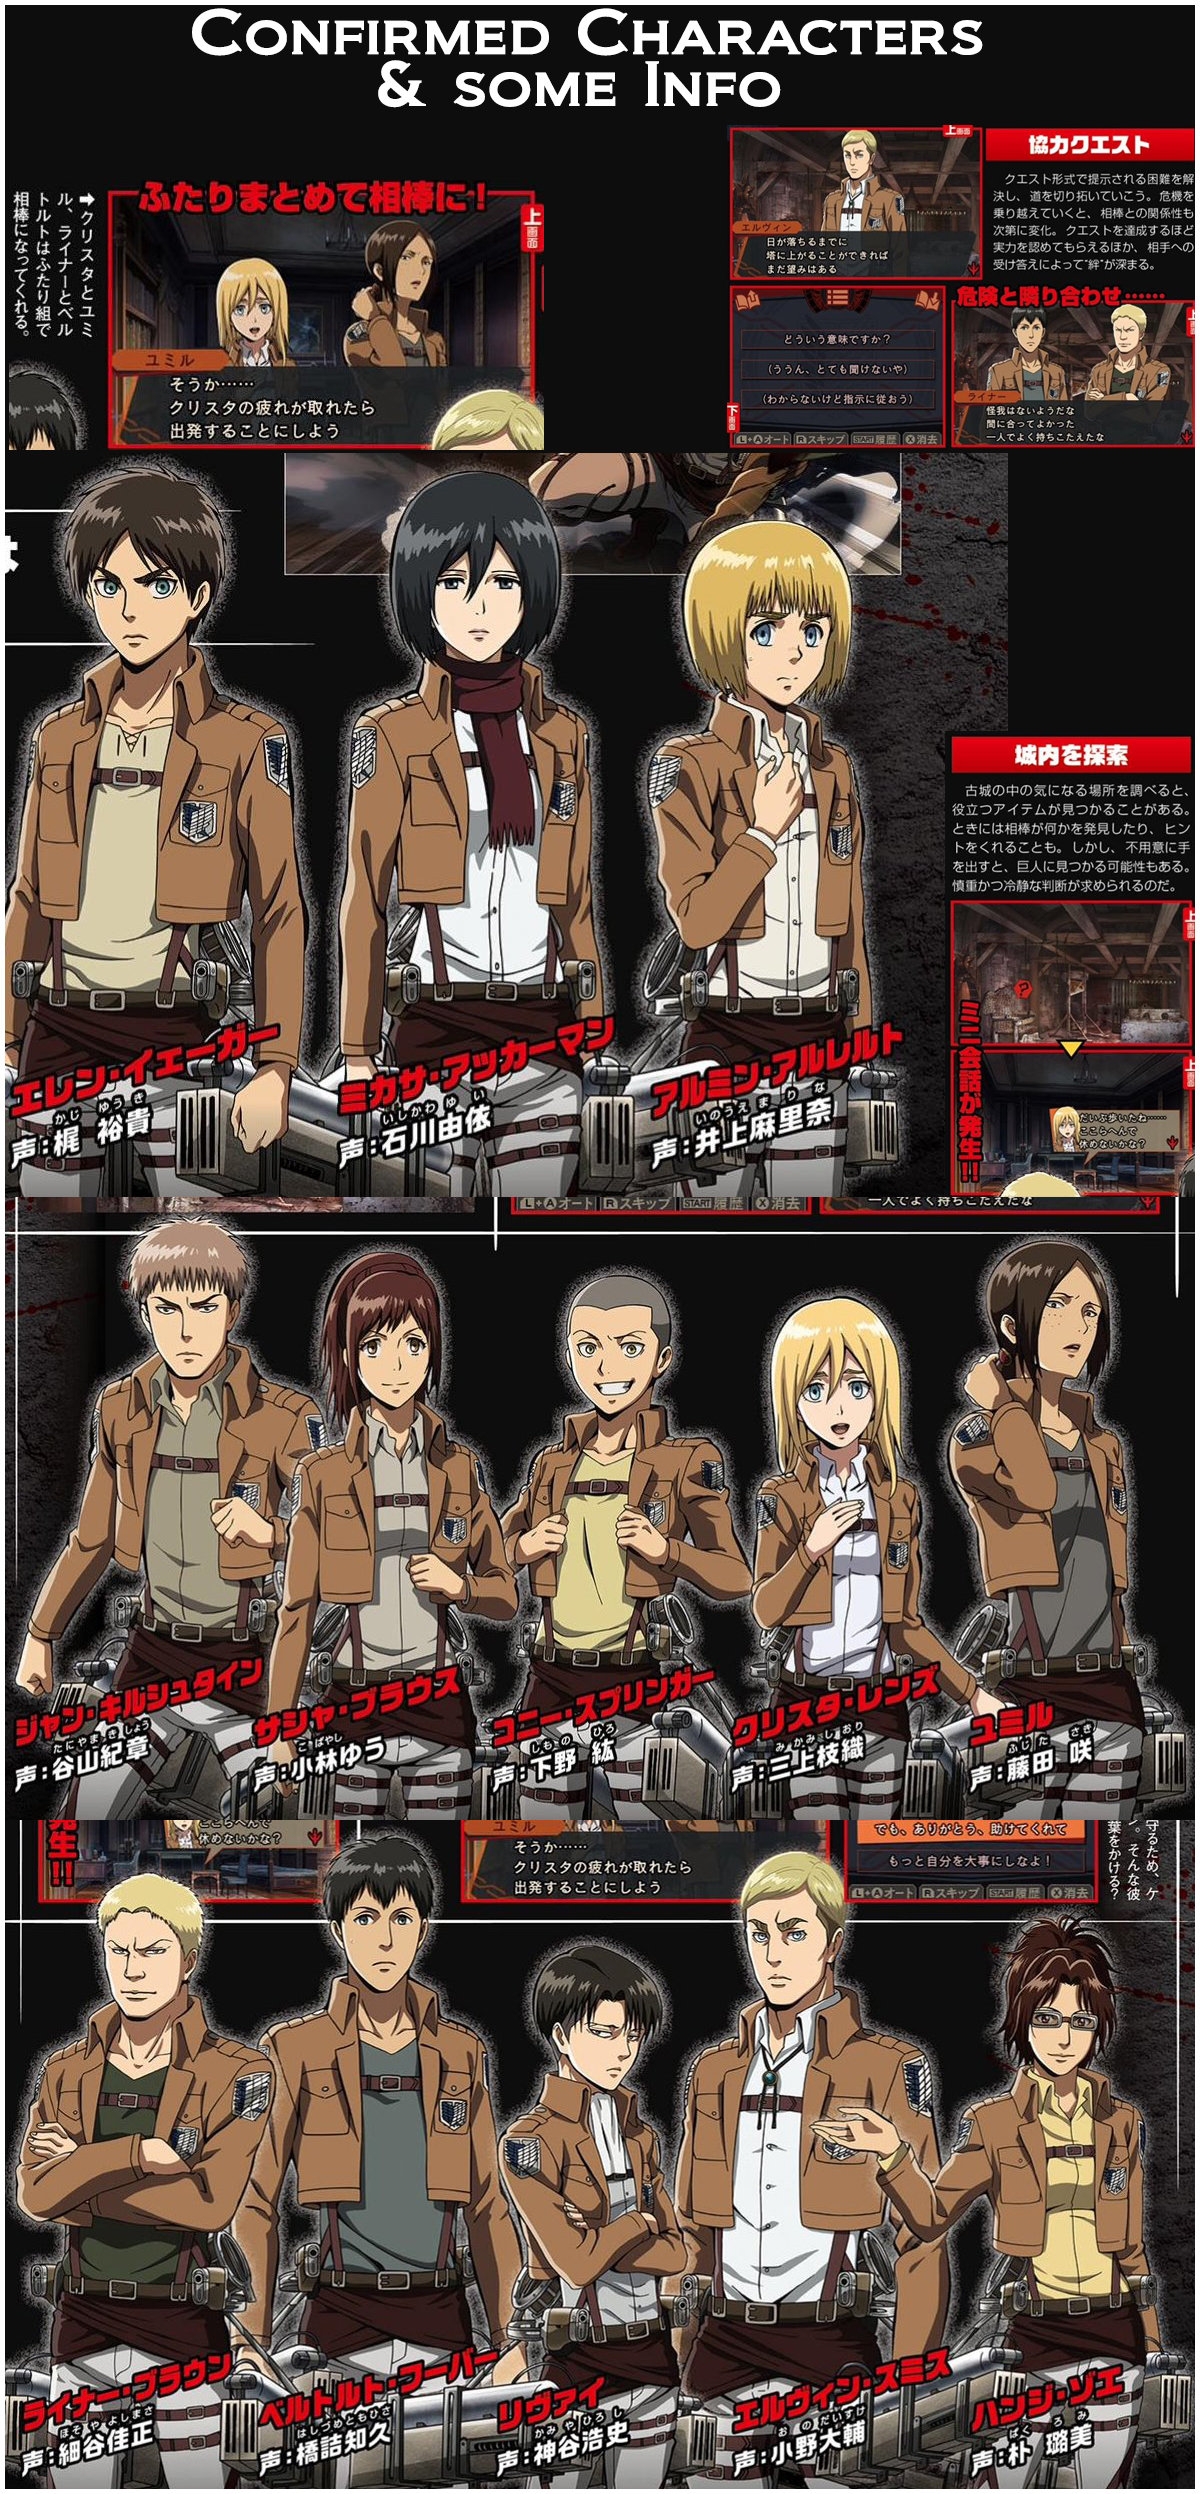 Online Attack on Titan Exhibition Explores the Life and Times of 38  Characters – OTAQUEST